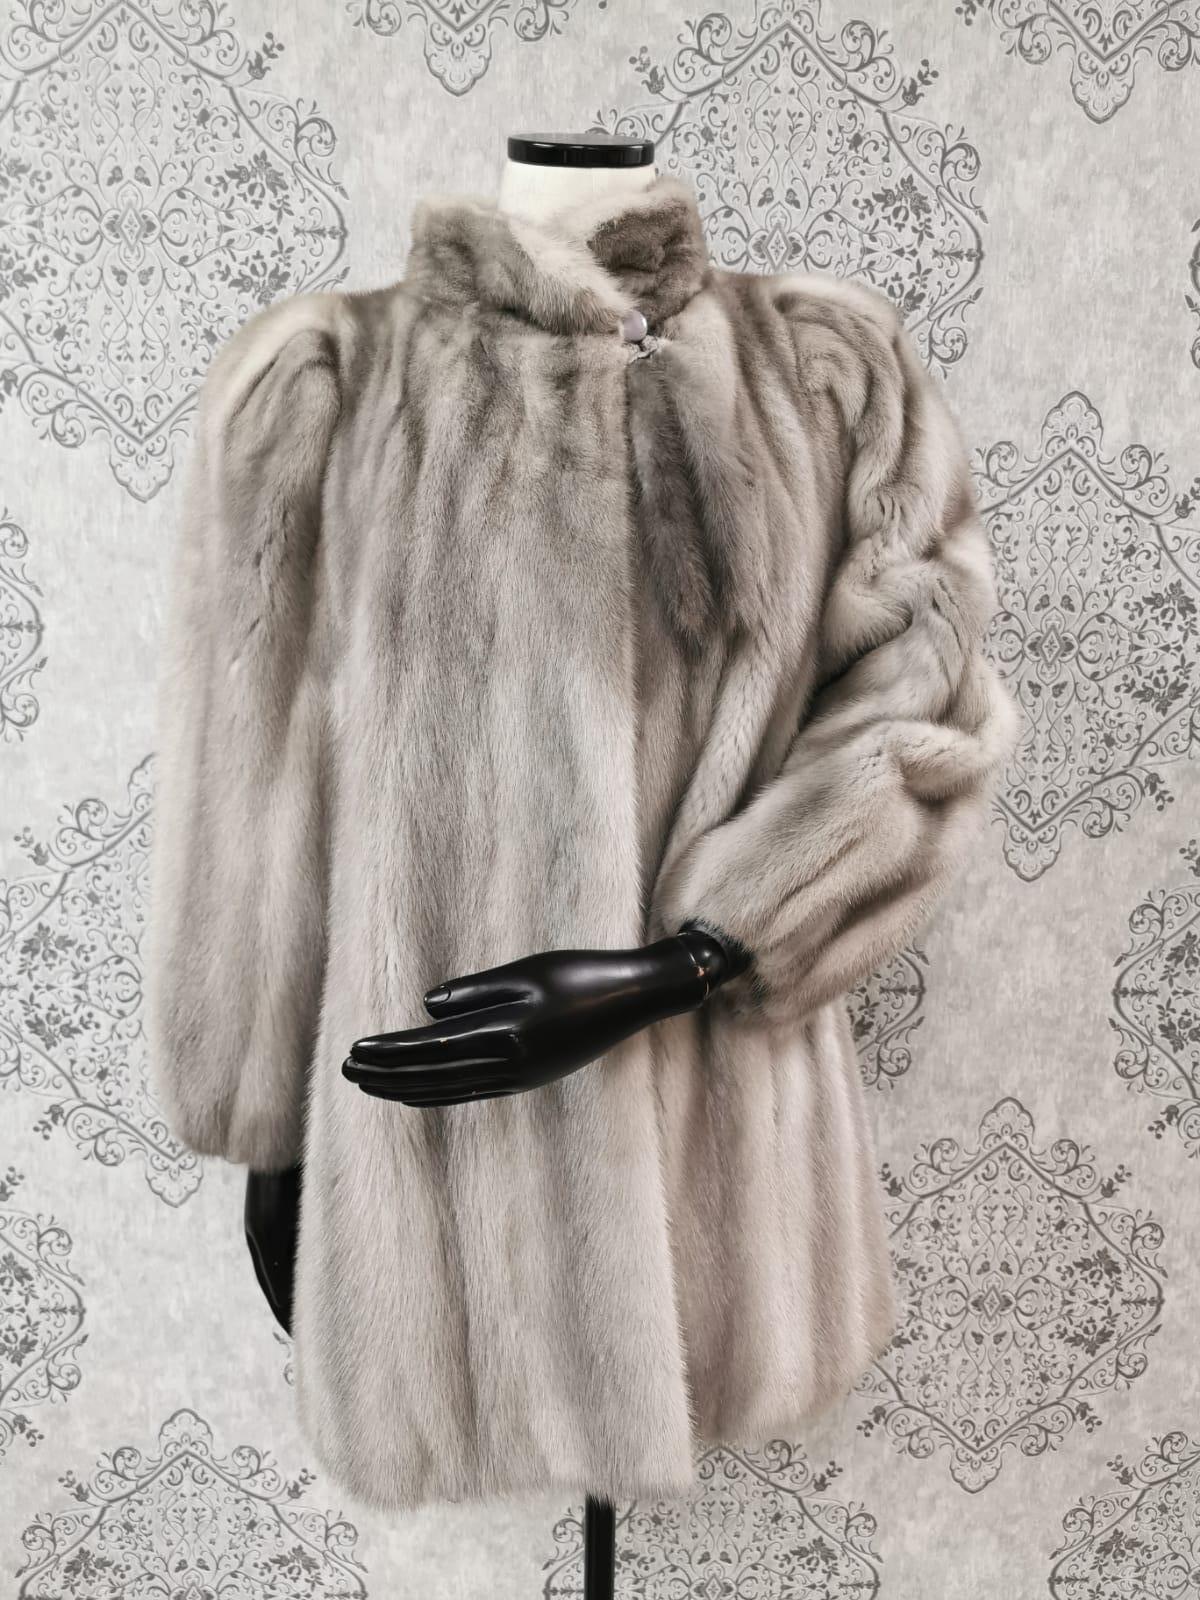 DESCRIPTION : 52 SAPPHIRE MINK FUR COAT SIZE 12

This stylish coat in an excellent condition has a tuxedo collar, princess cuffs, European German clasps for closure, too slit pockets, grey silk satin lining, and two cute mink fur legs as brooch